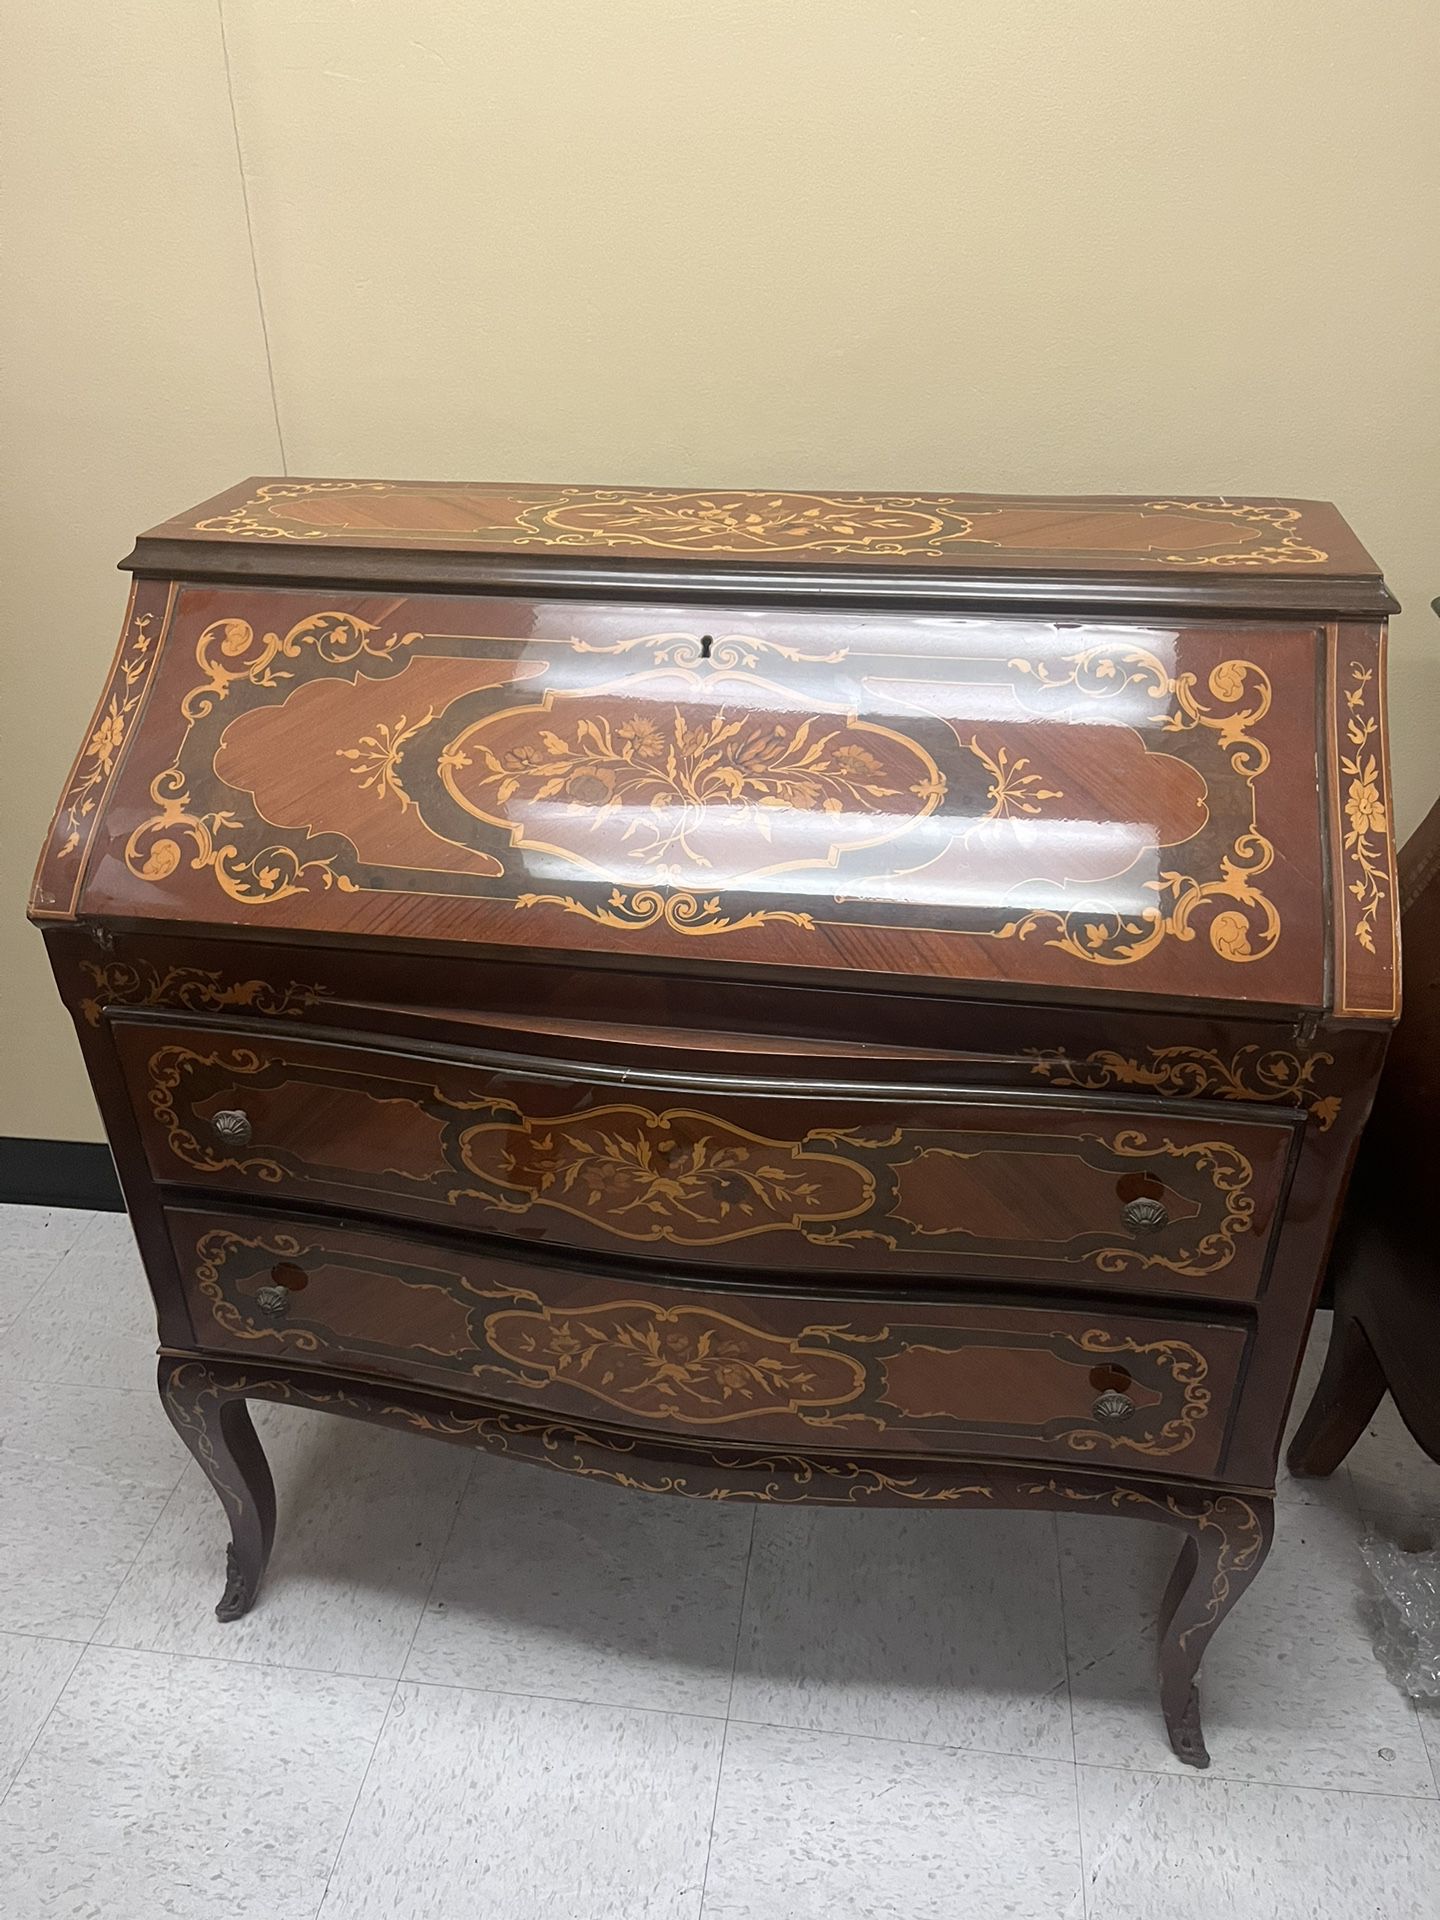 Antique Desk With Drawers